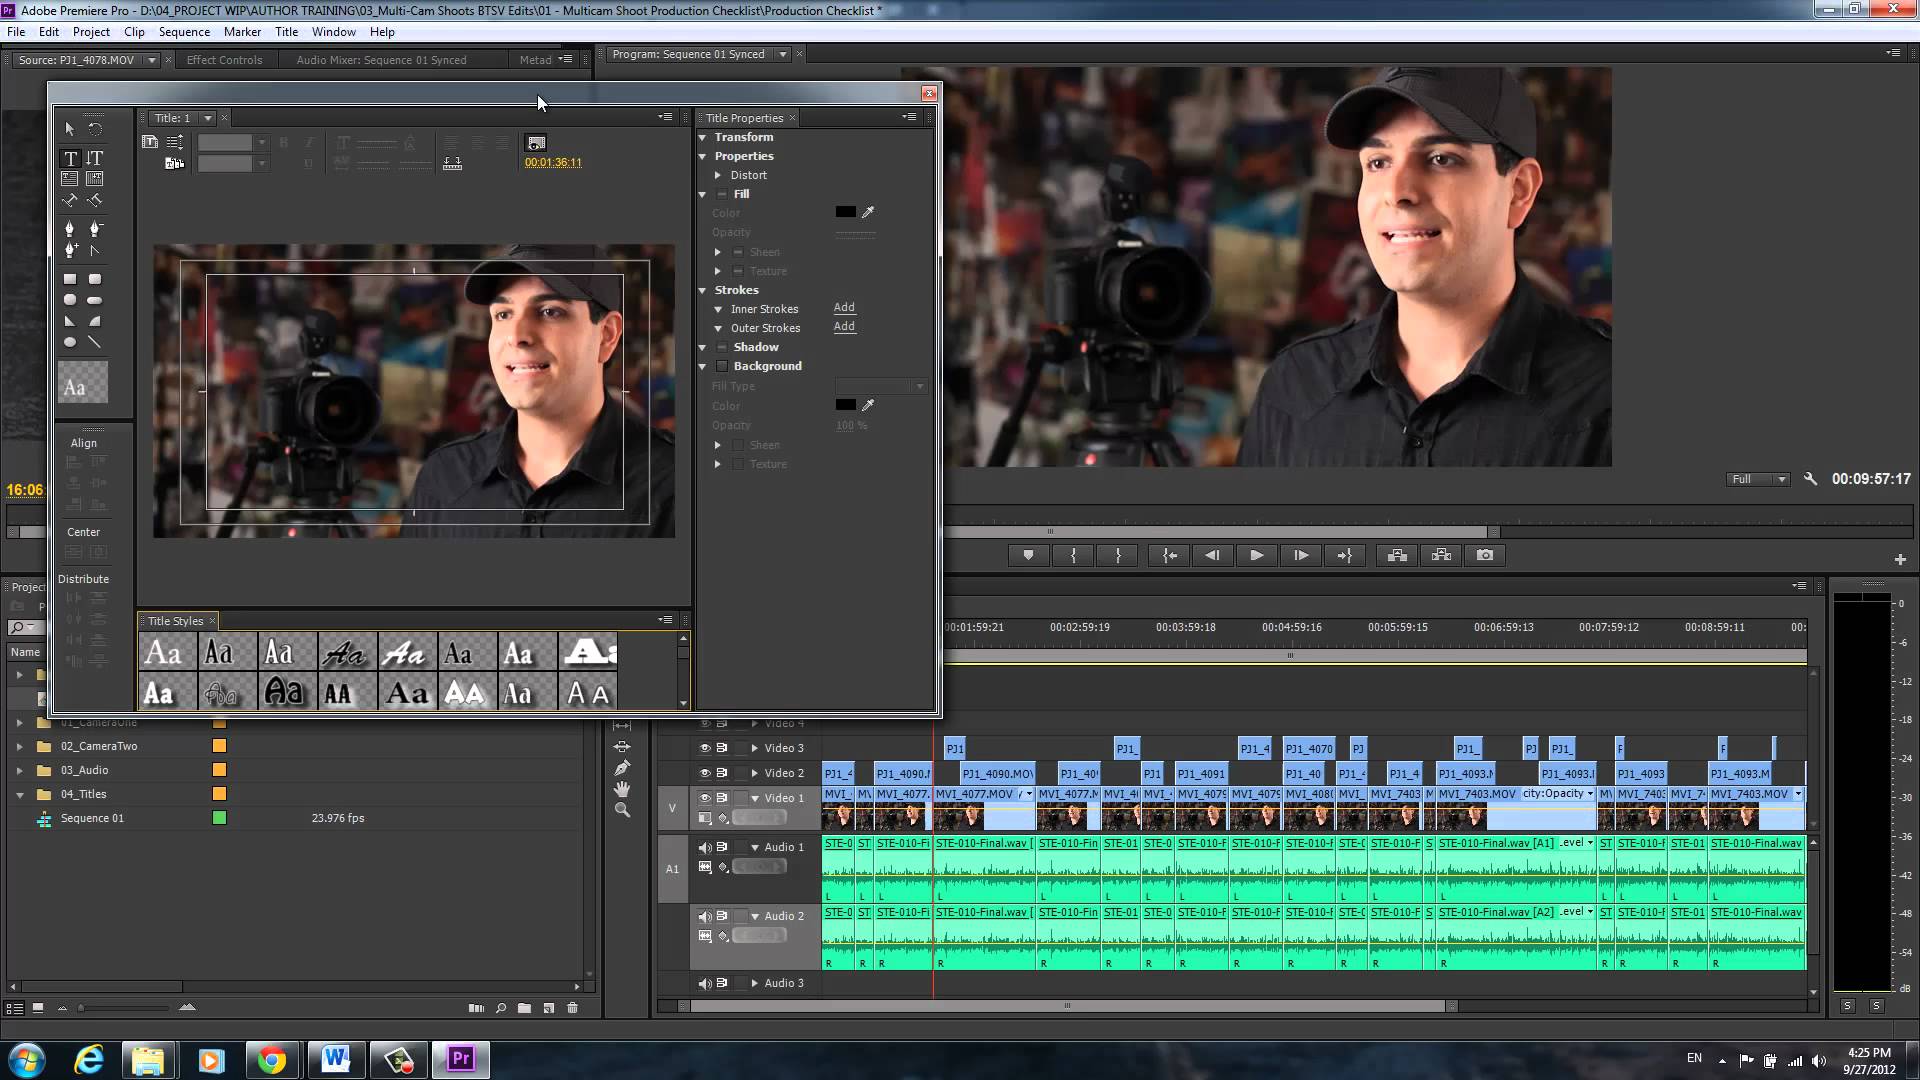 Multi-Camera DSLR Video Editing Tutorial From Start to Finish in Premiere Pro CS6 – Part 2 for Staff